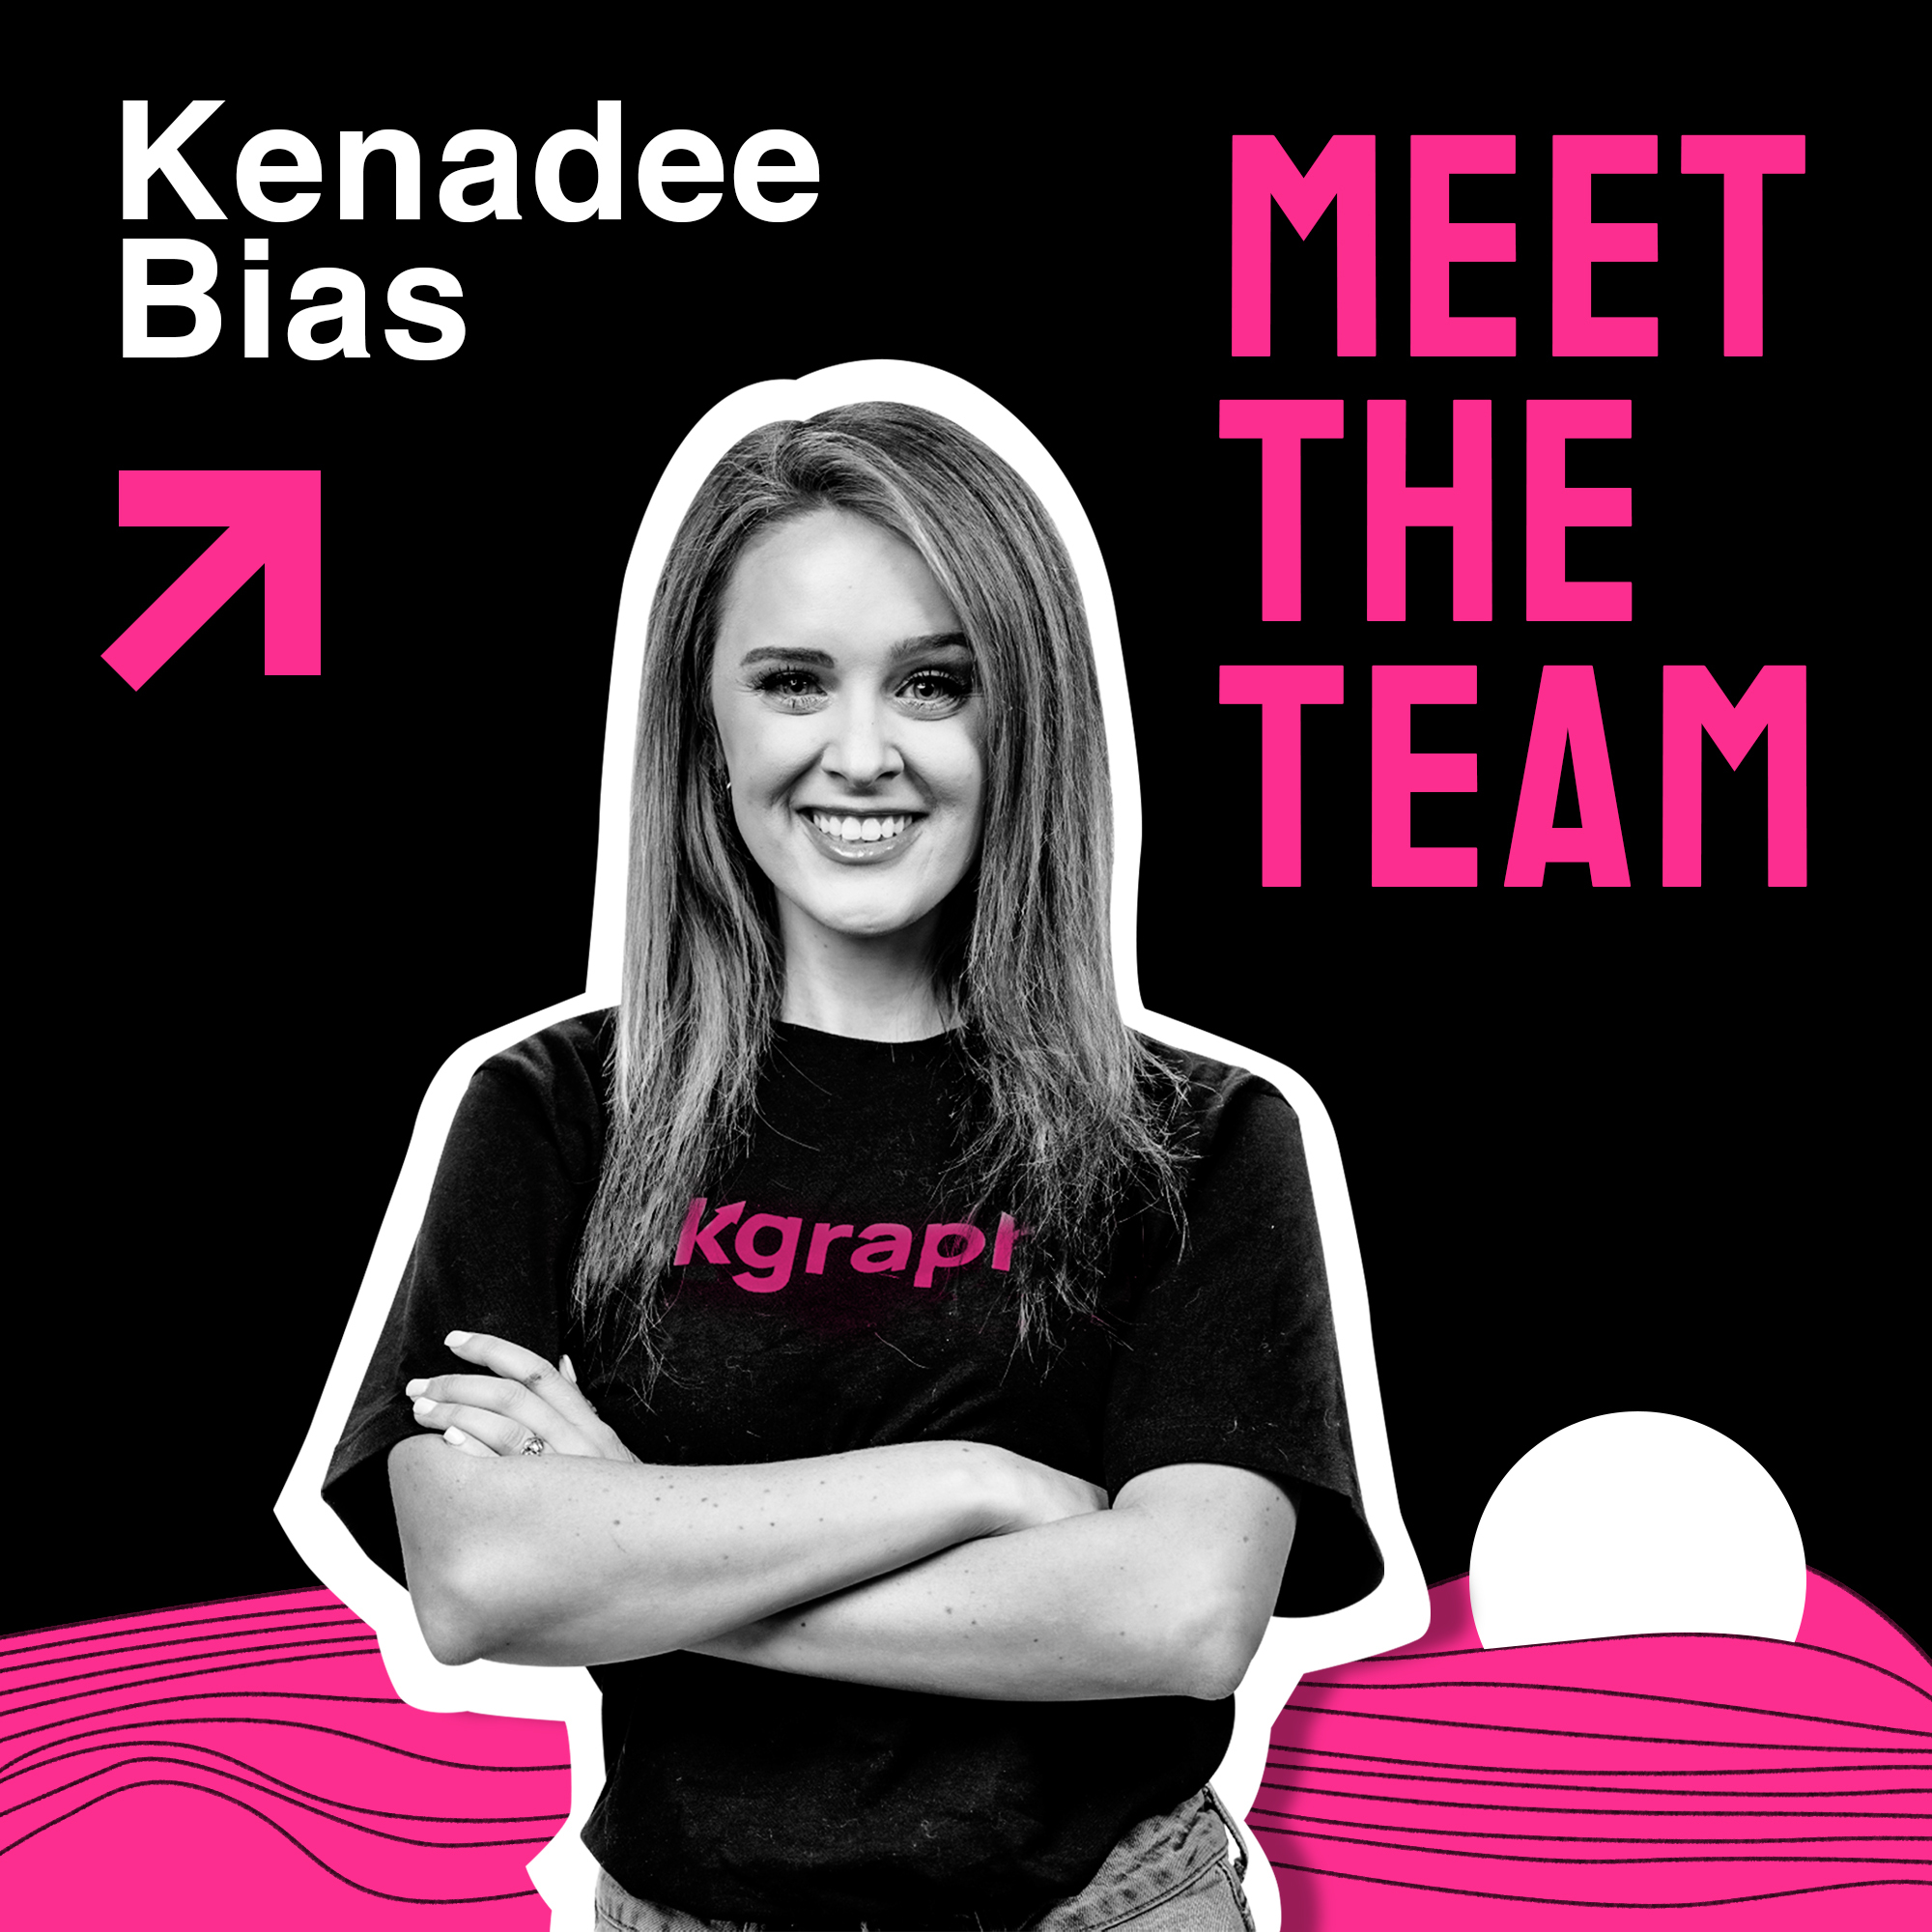 A graphic with Kenadee in the center and a black, white, and pink background with the words Kenadee Bias and Meet the Team